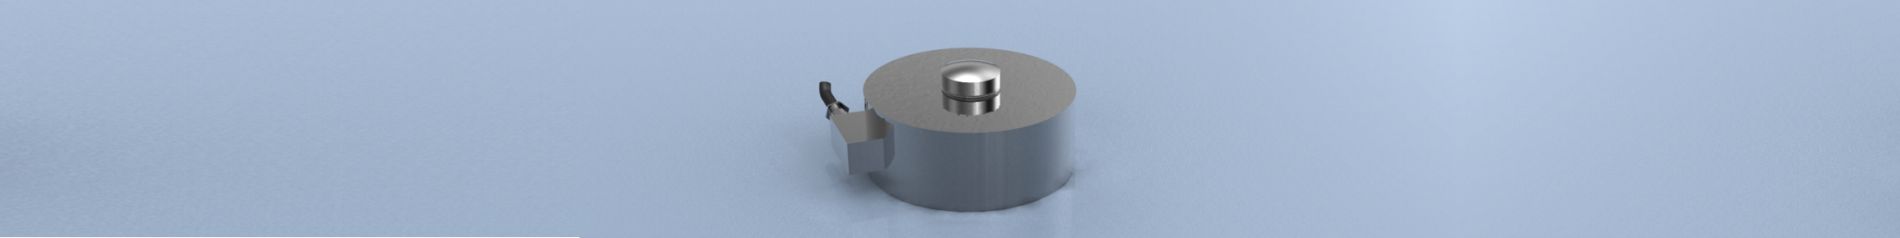 CDIT-3 Low Profile High Accuracy Compression Load Cell